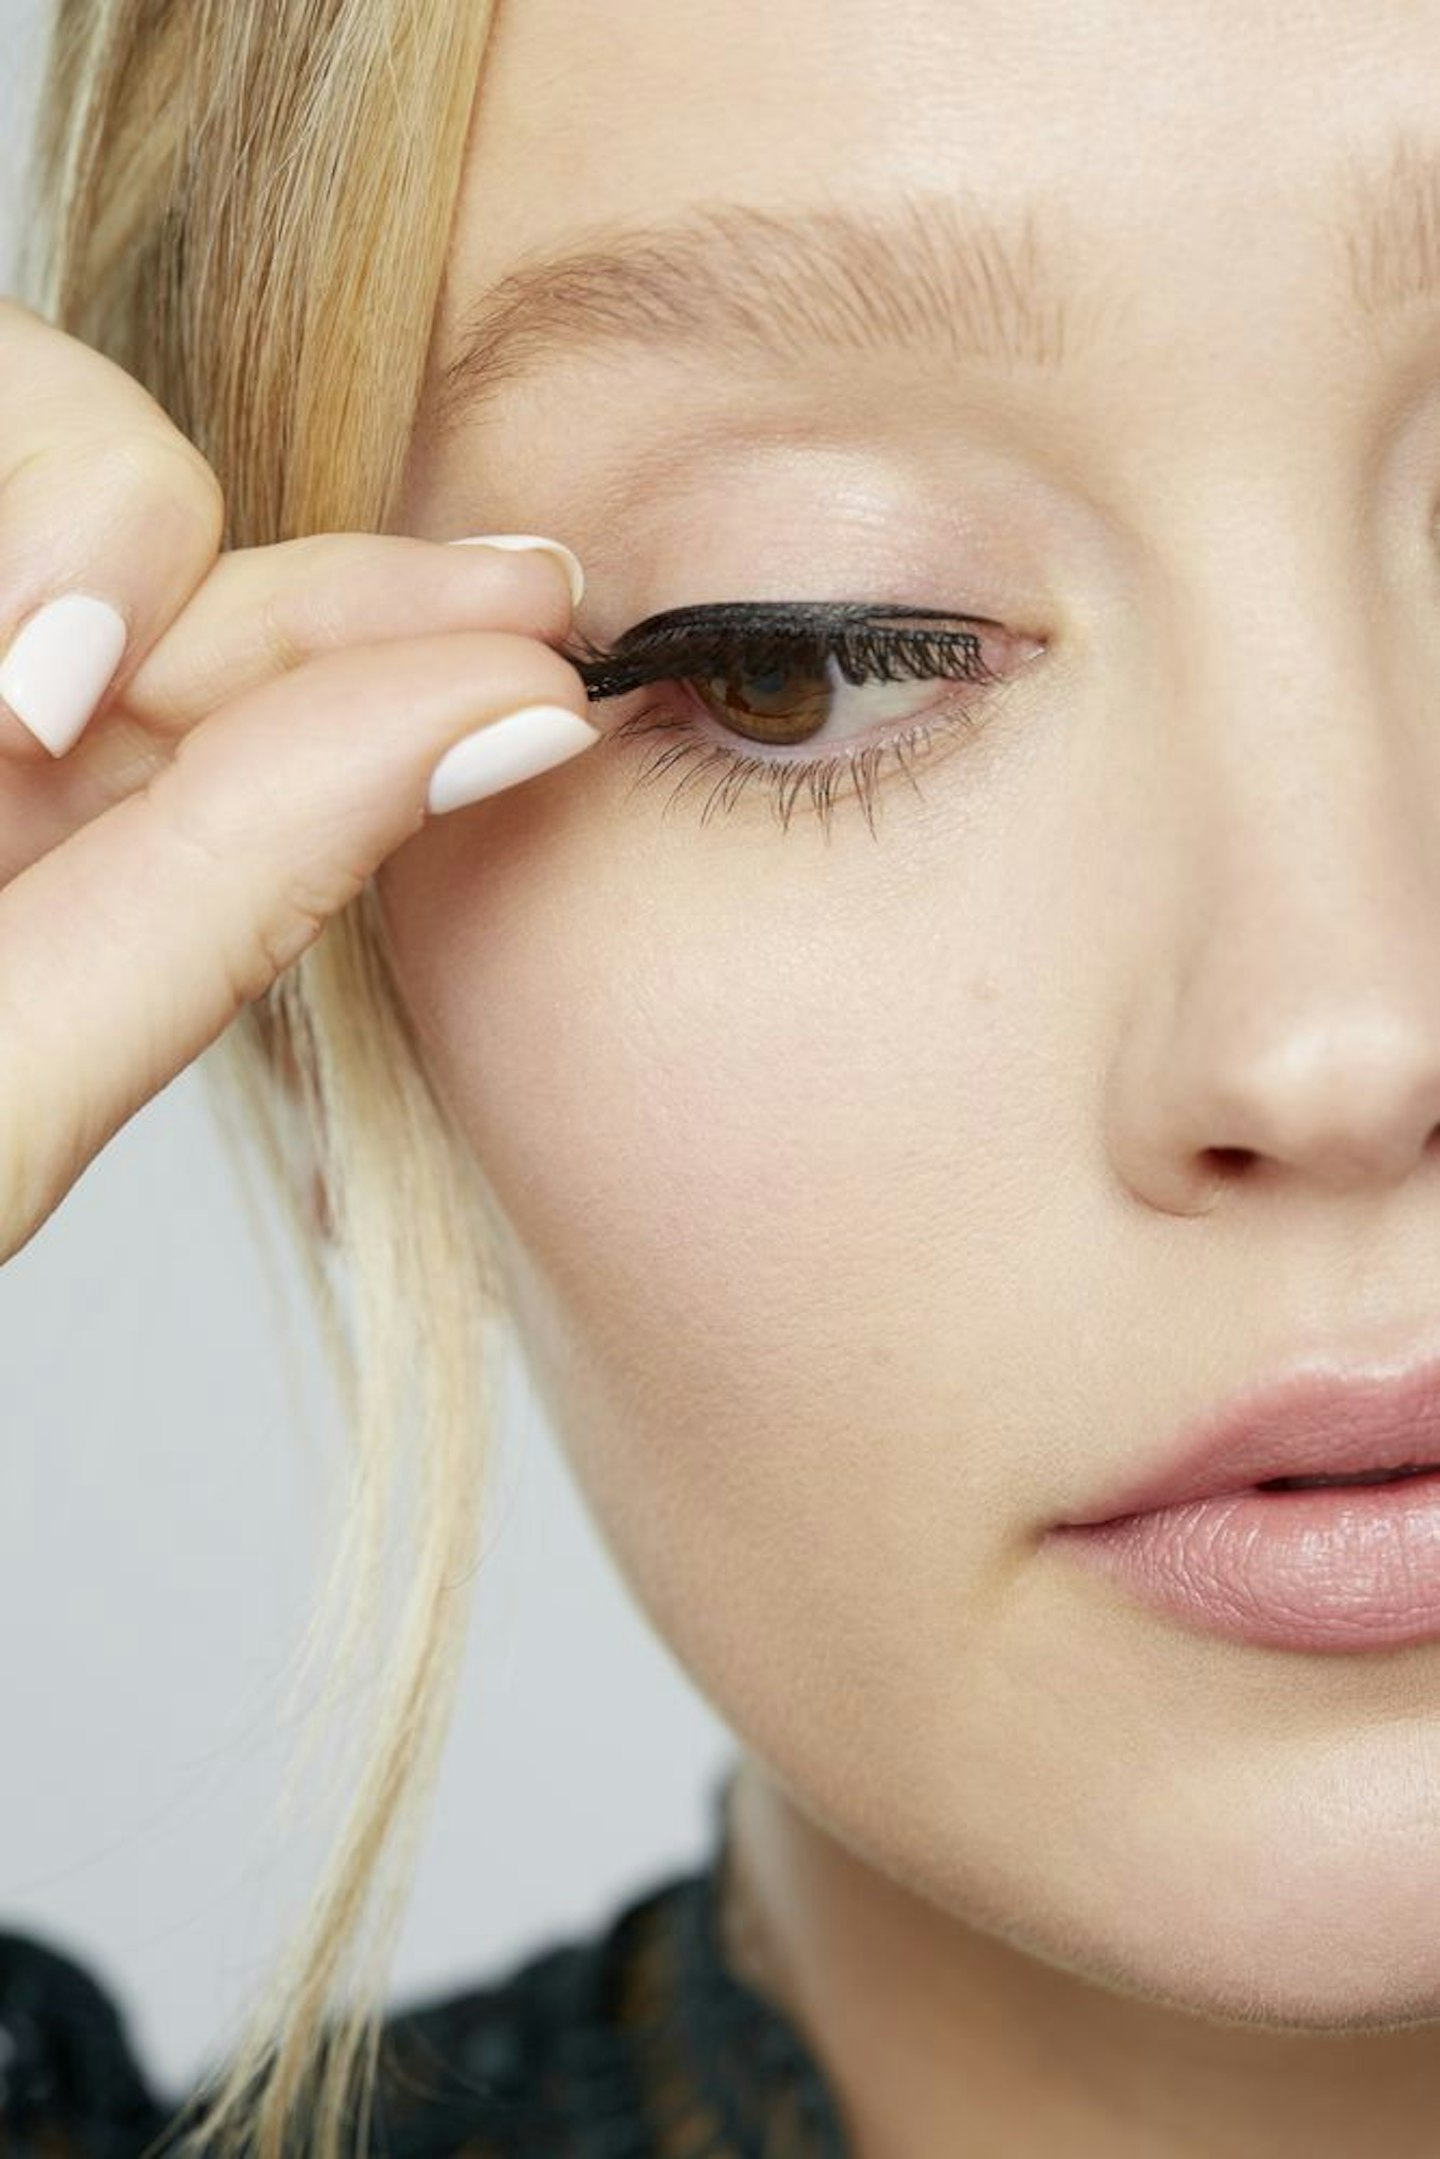 How to apply false lashes